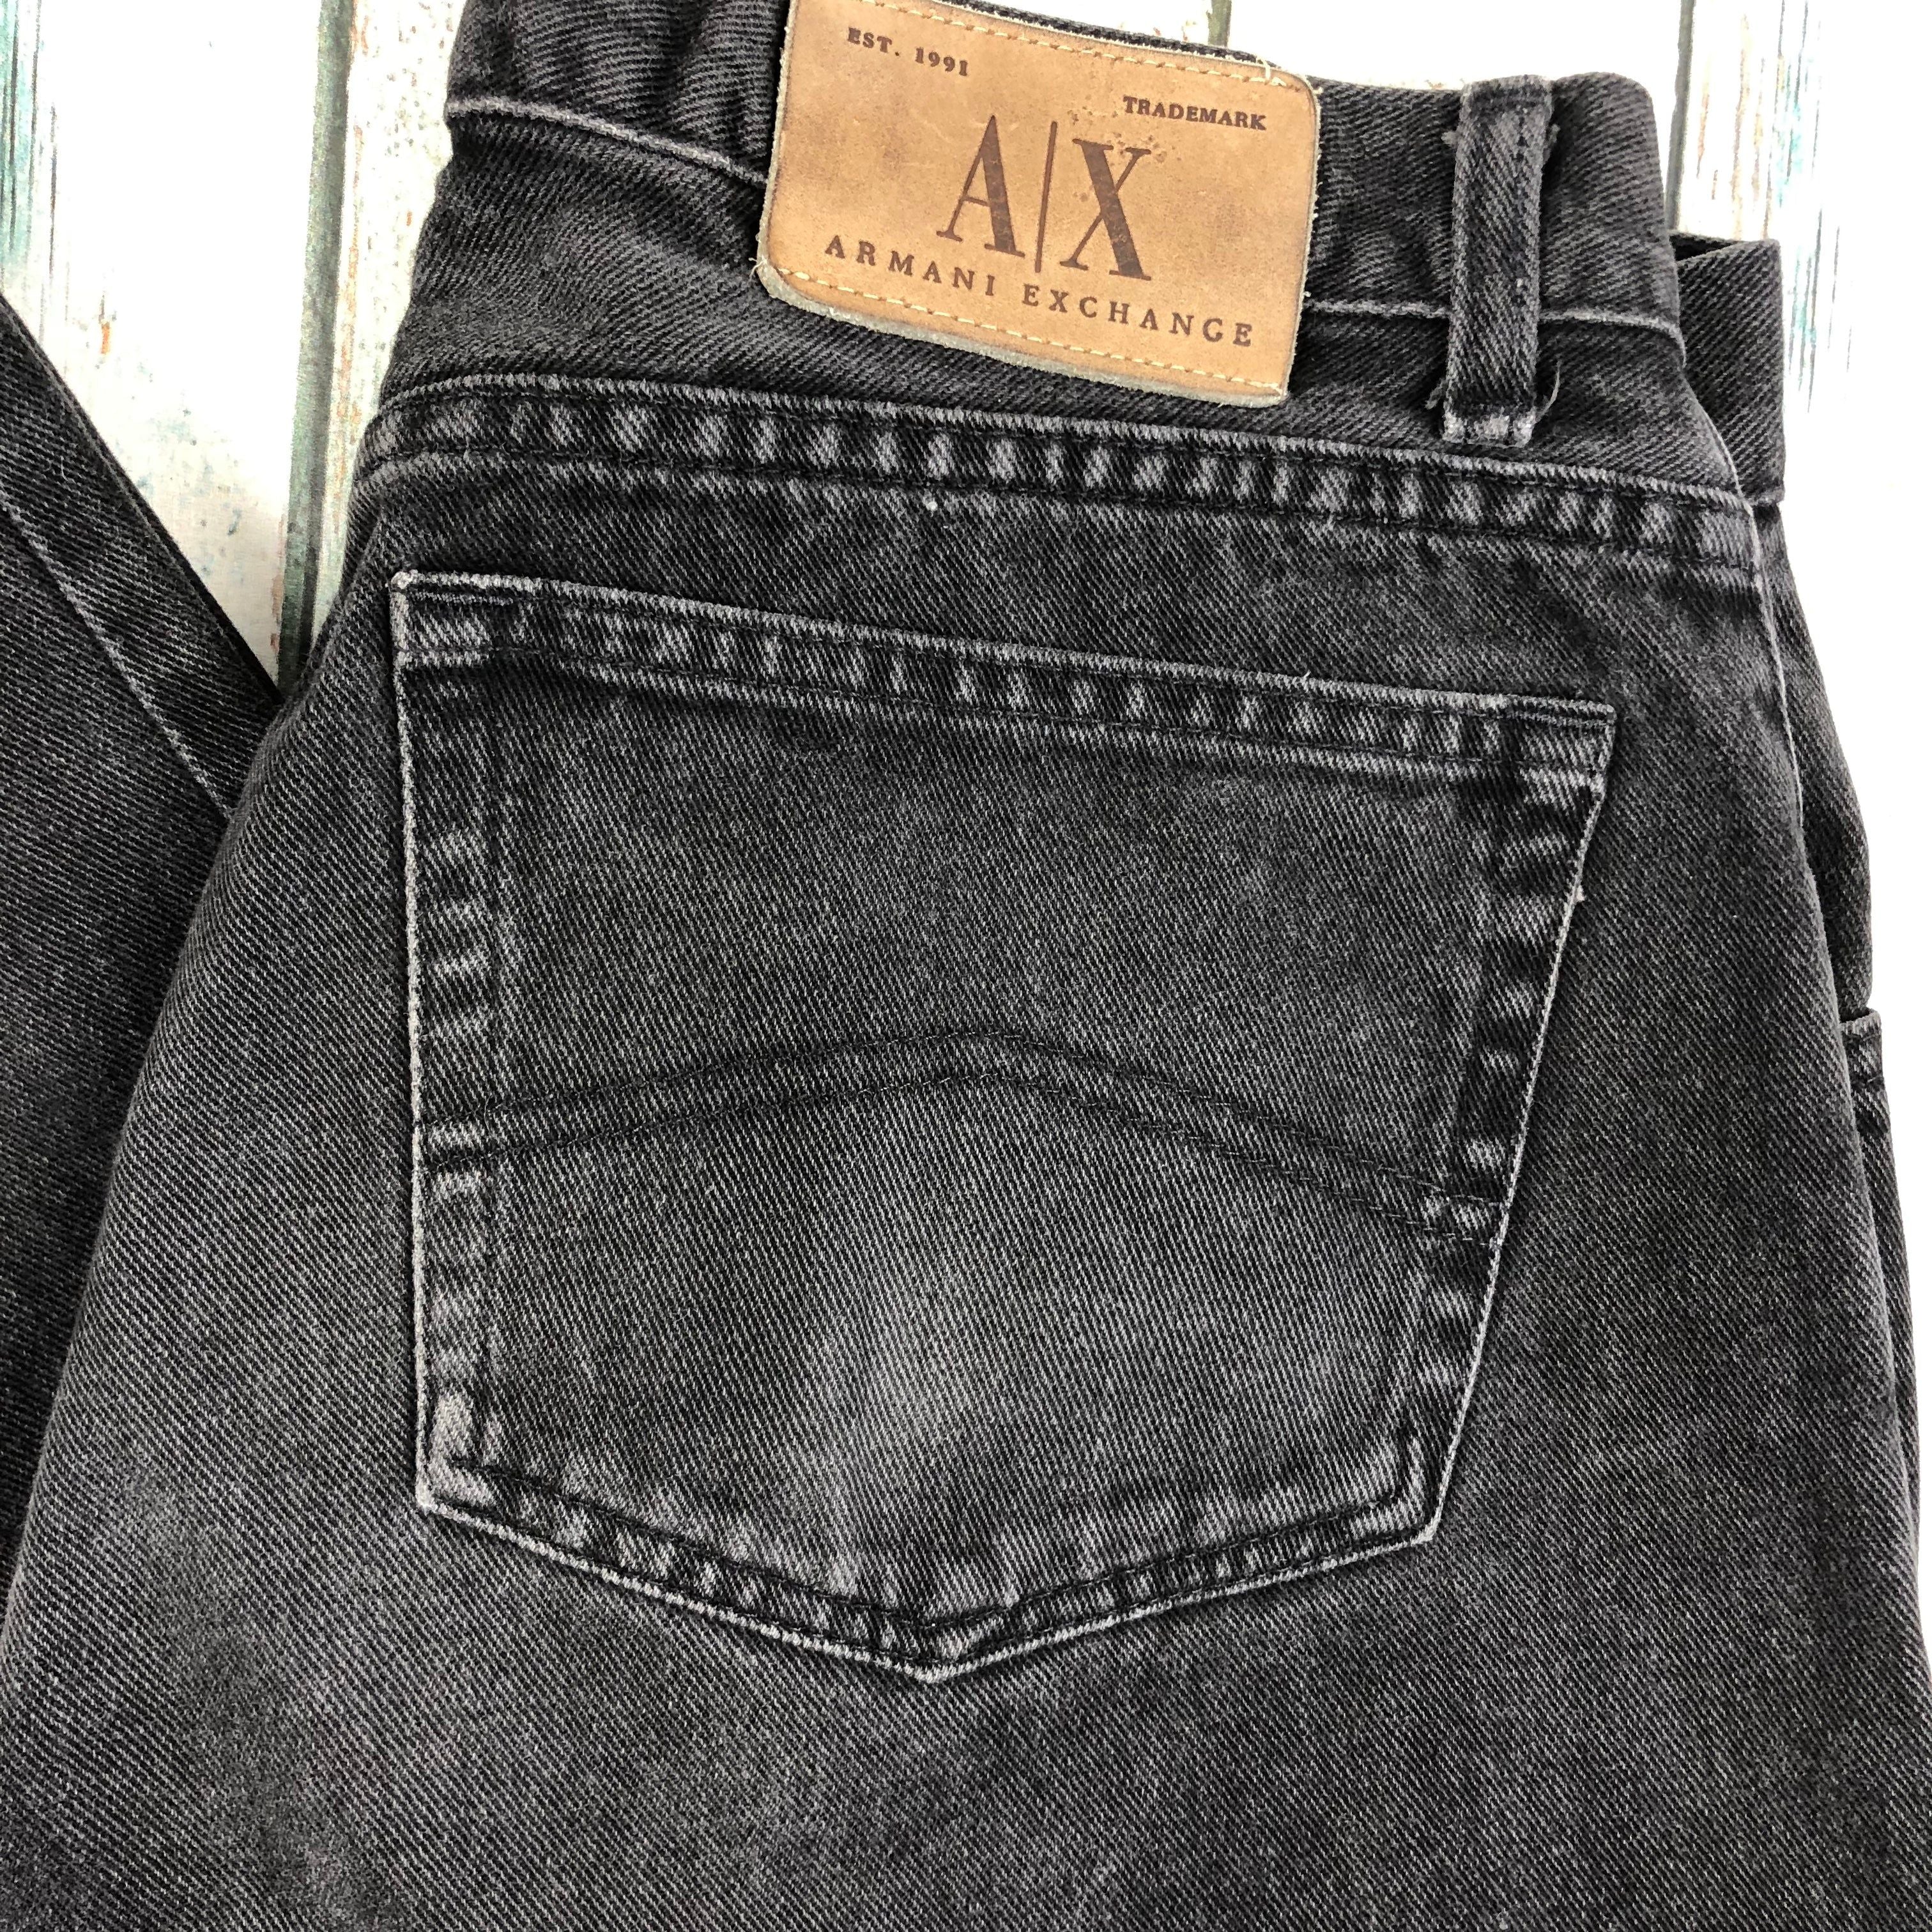 armani exchange jeans price in india